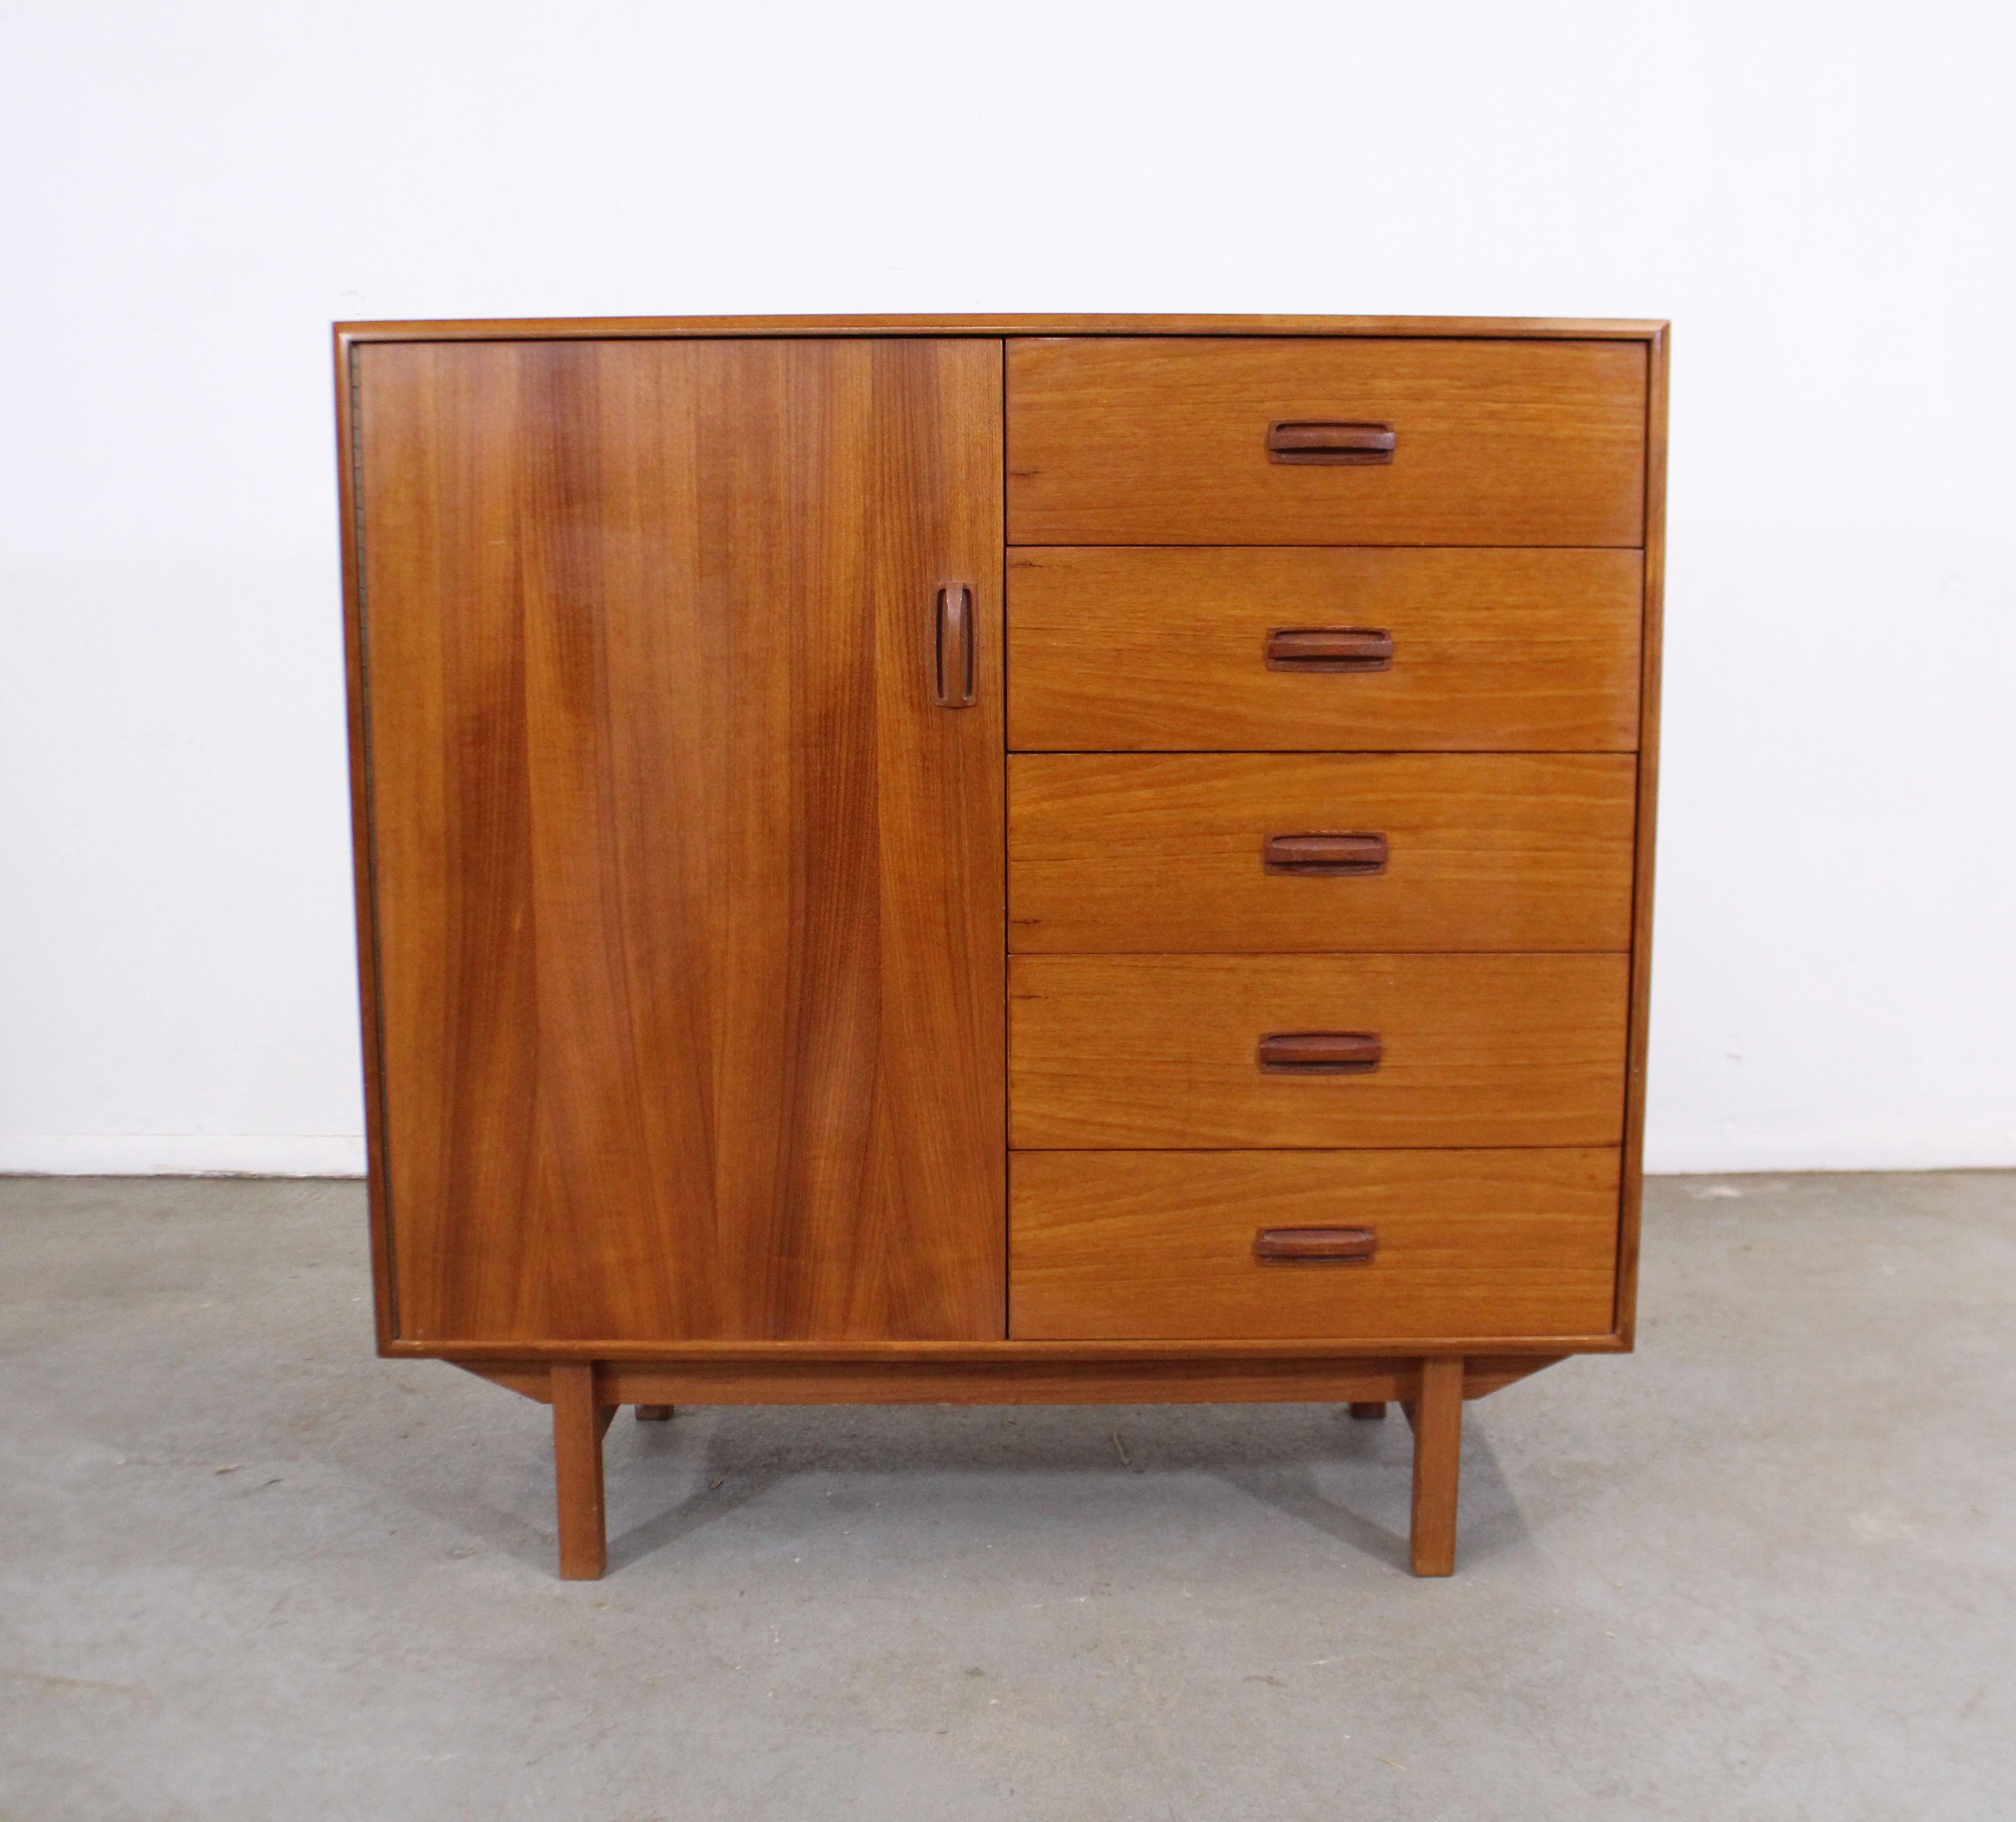 Mid-Century Danish modern edmond spence tall chest dresser

Offered is a beautiful Mid-Century Modern tall chest with ample storage space. Features five drawers and inner adjustable shelving. In good condition for its age with slight age wear